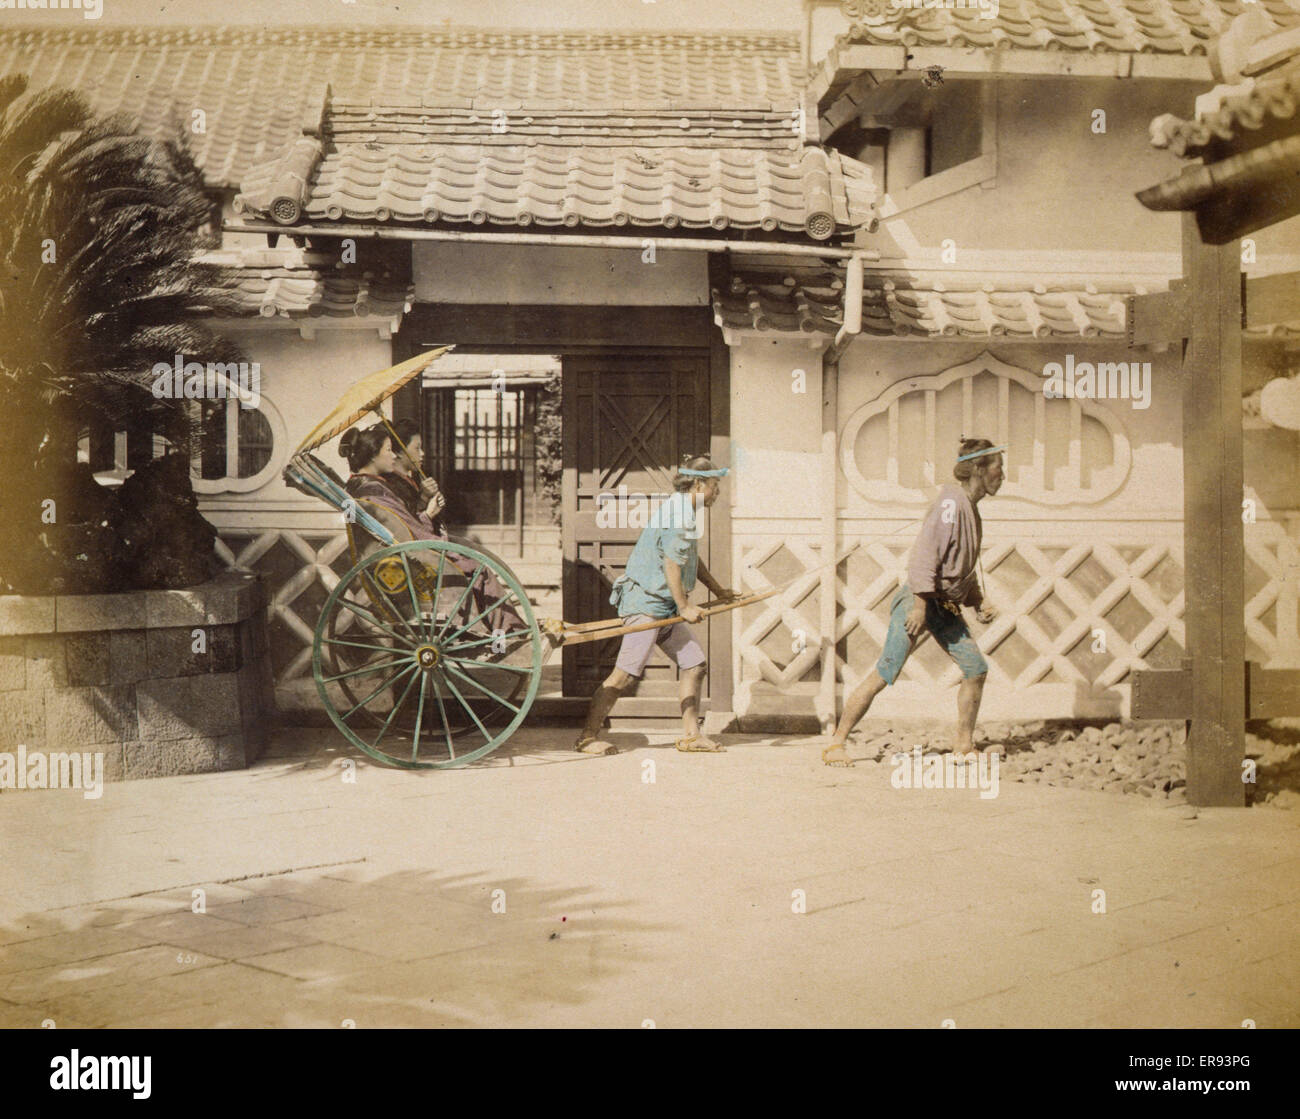 Two women riding in a rickshaw. Photograph shows two women with a large parasol riding in a rickshaw pulled by a man with a second man walking nearby, possibly to relieve the first man. Exterior view of building with tiled roof in the background. Date ca. Stock Photo